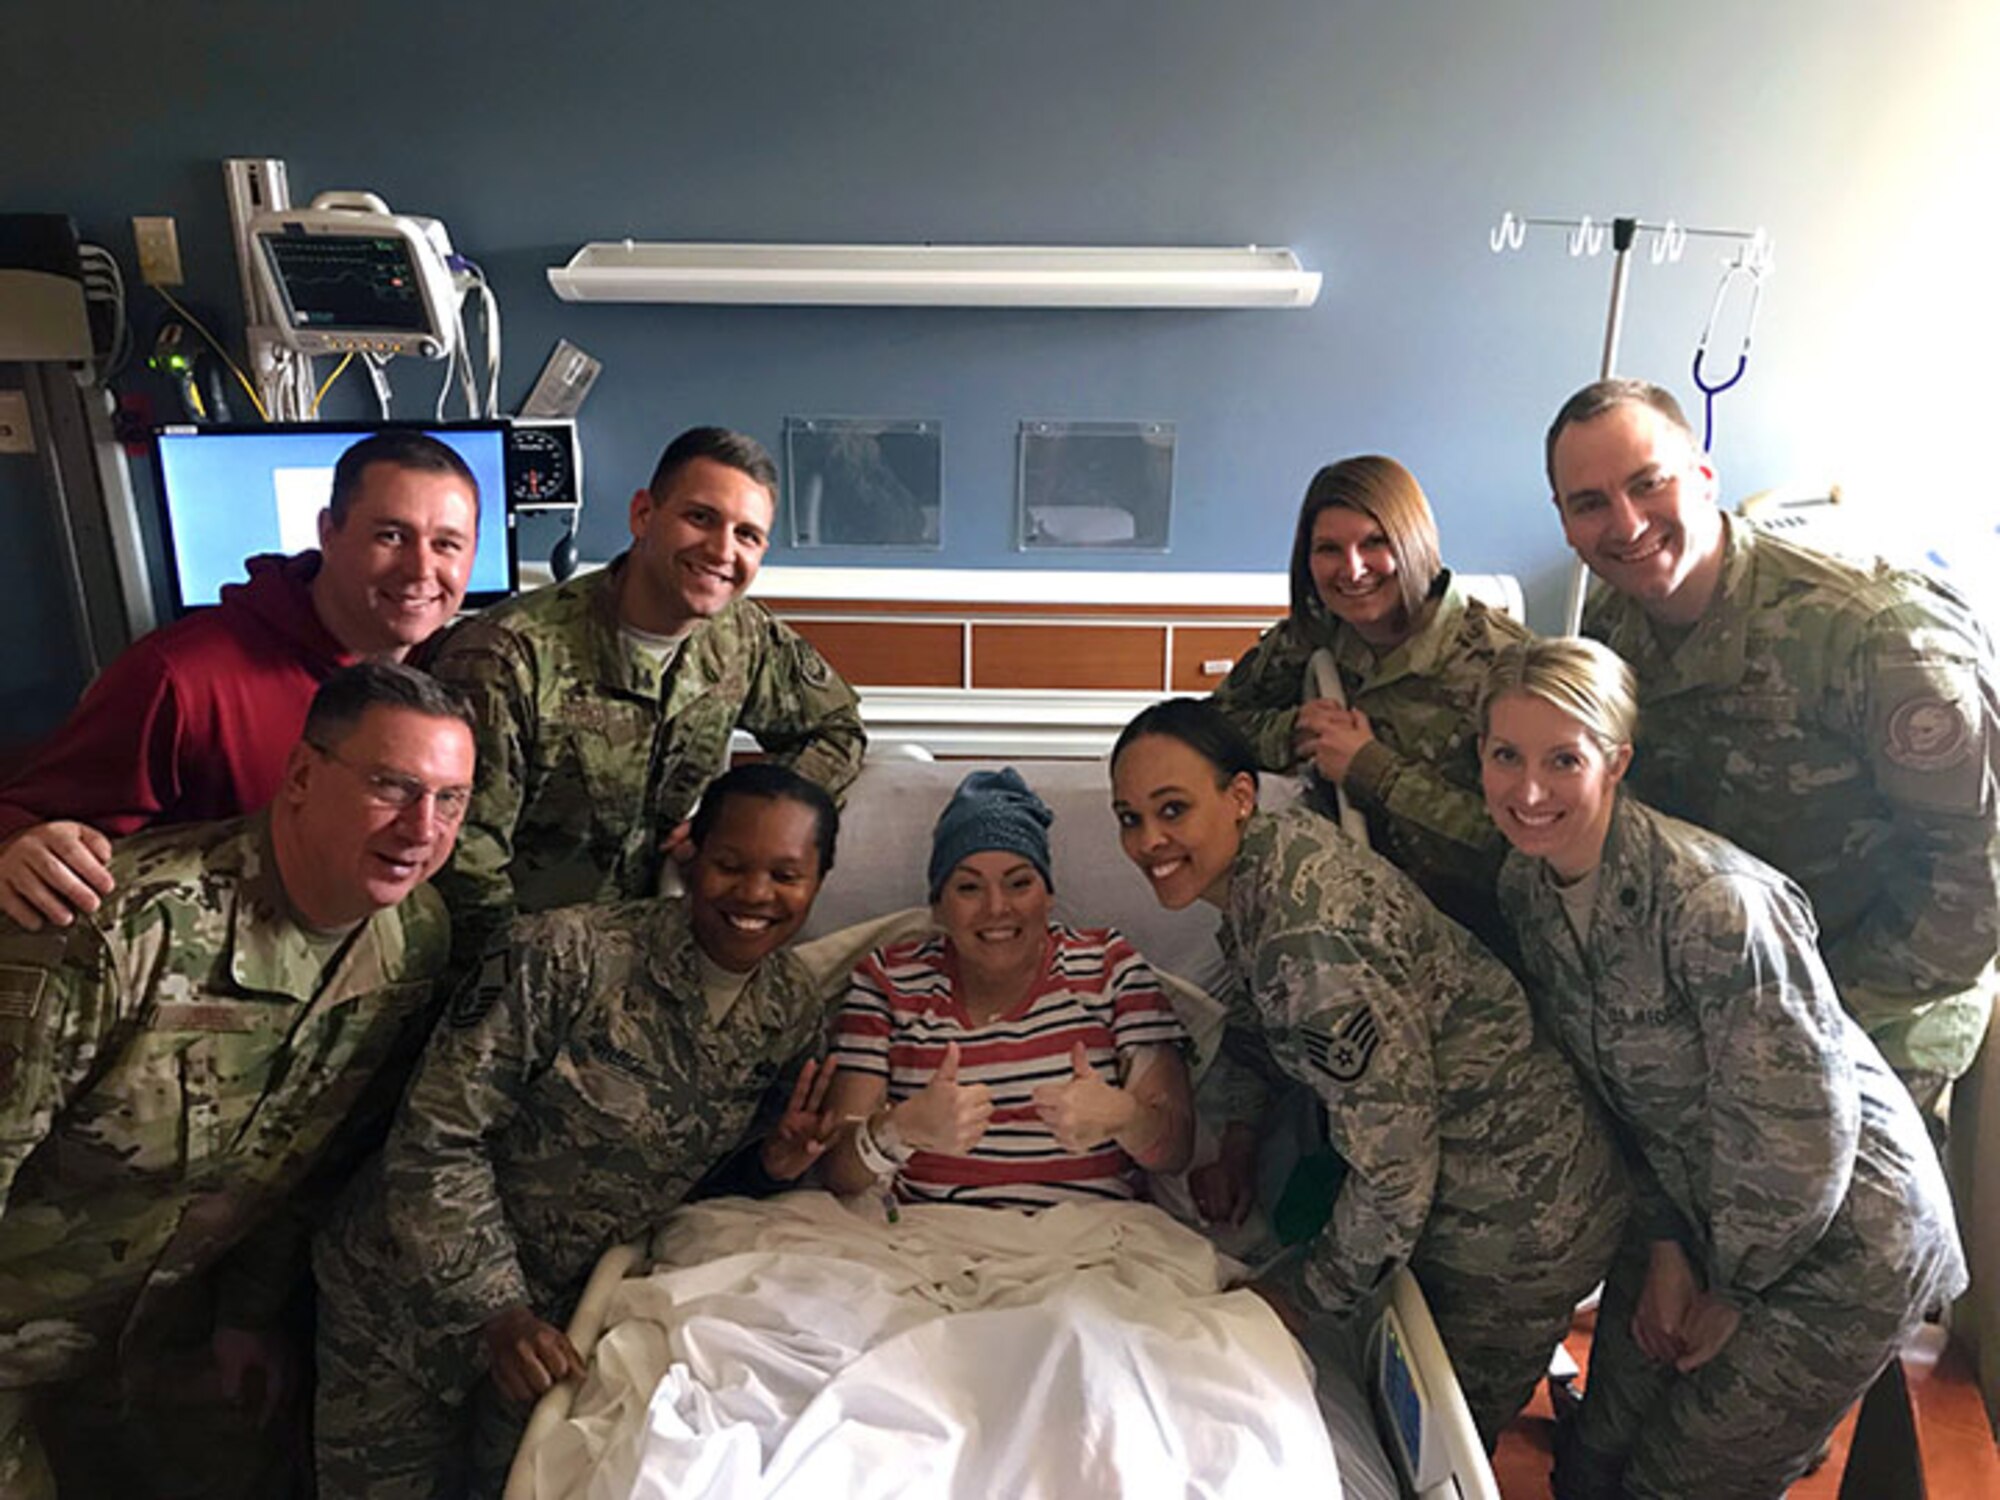 Master Sgt. Charlotte Ortiz, the assistant recruiting and retention superintendent for Headquarters, Ohio Air National Guard in Columbus, Ohio, exhibits her positive, joyful spirit during a visit with her co-workers, at Miami Valley Hospital in Dayton, Ohio. Ortiz is fighting a very rare type of cancer.